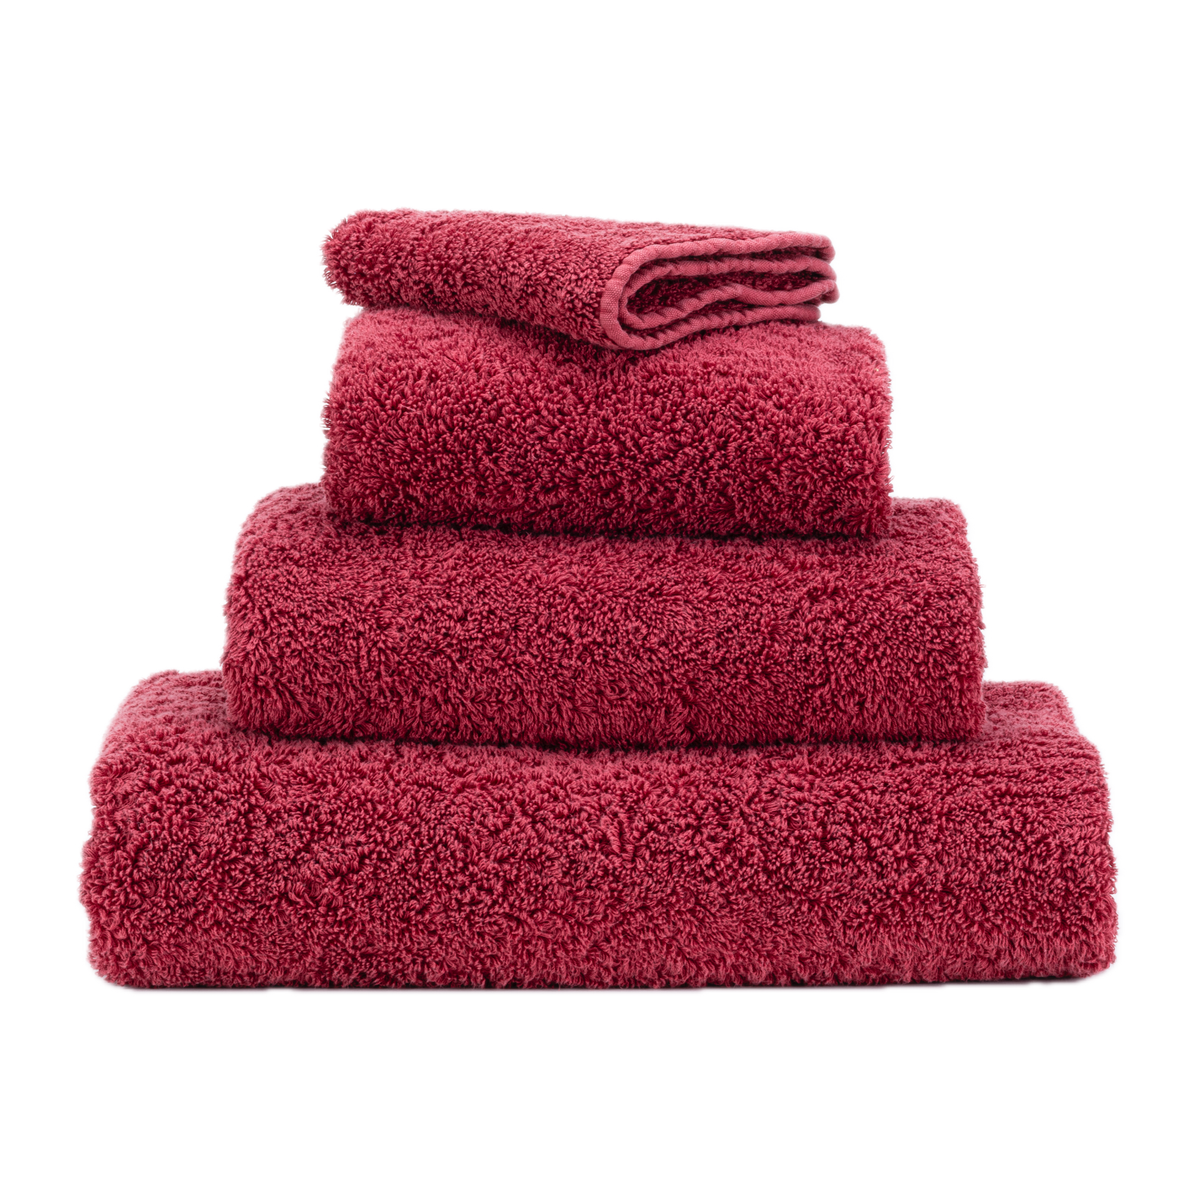 Stack of Abyss Super Pile Bath Towels in Canyon Color